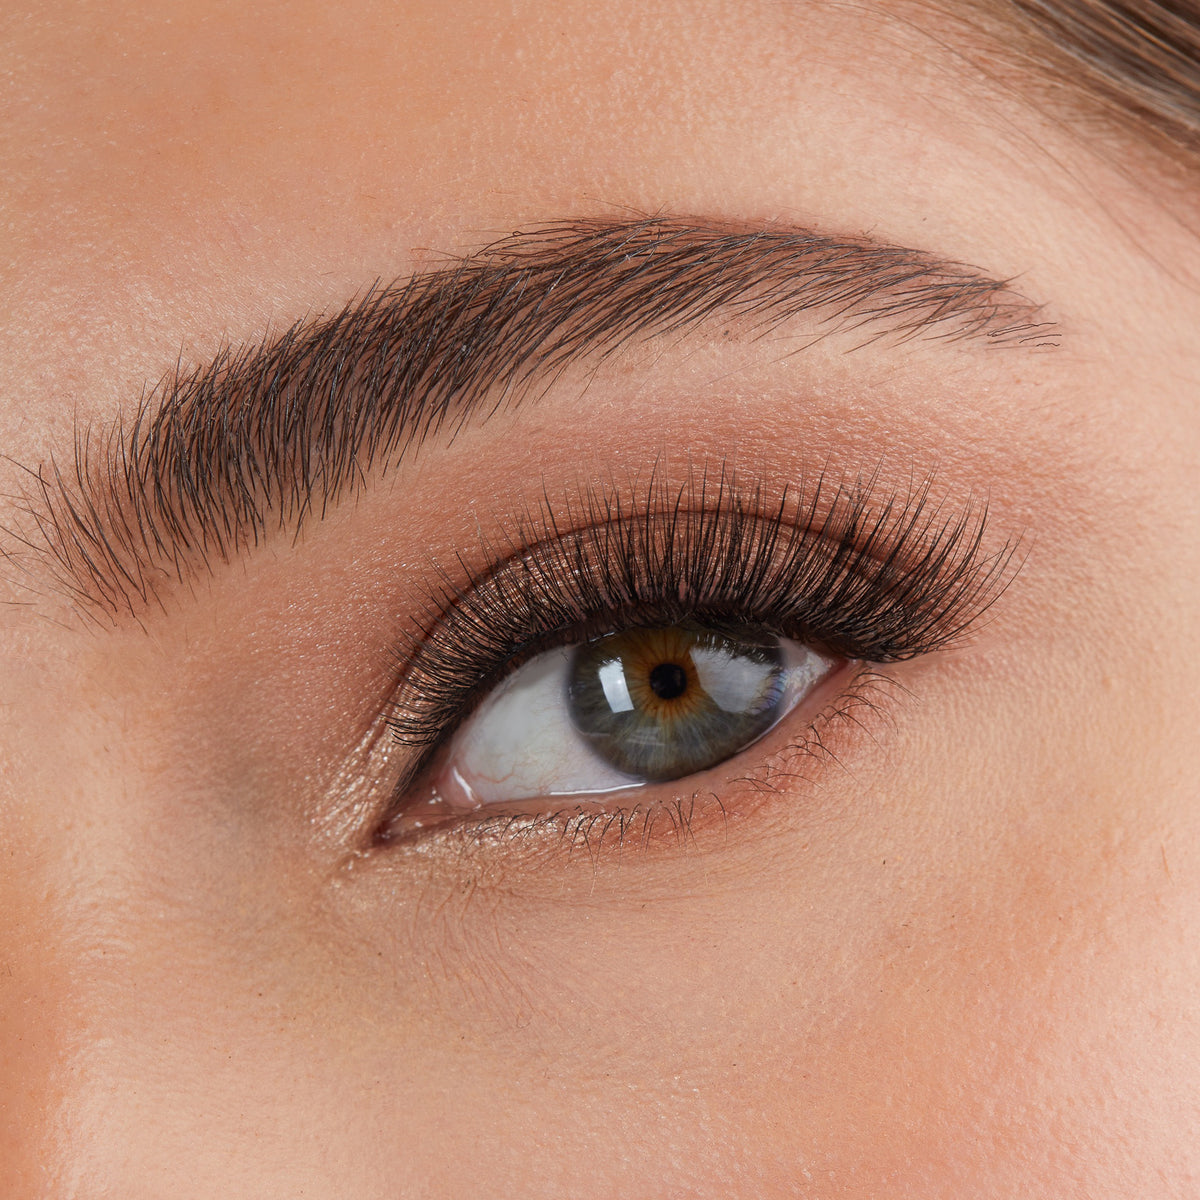 Lithe Lashes Core Collection lash style named 06 Natural and Classic, a close up eye thumbnail image of the model's eye wearing the false lashes for an up close perspective on how elegant the falsies look on the eye.